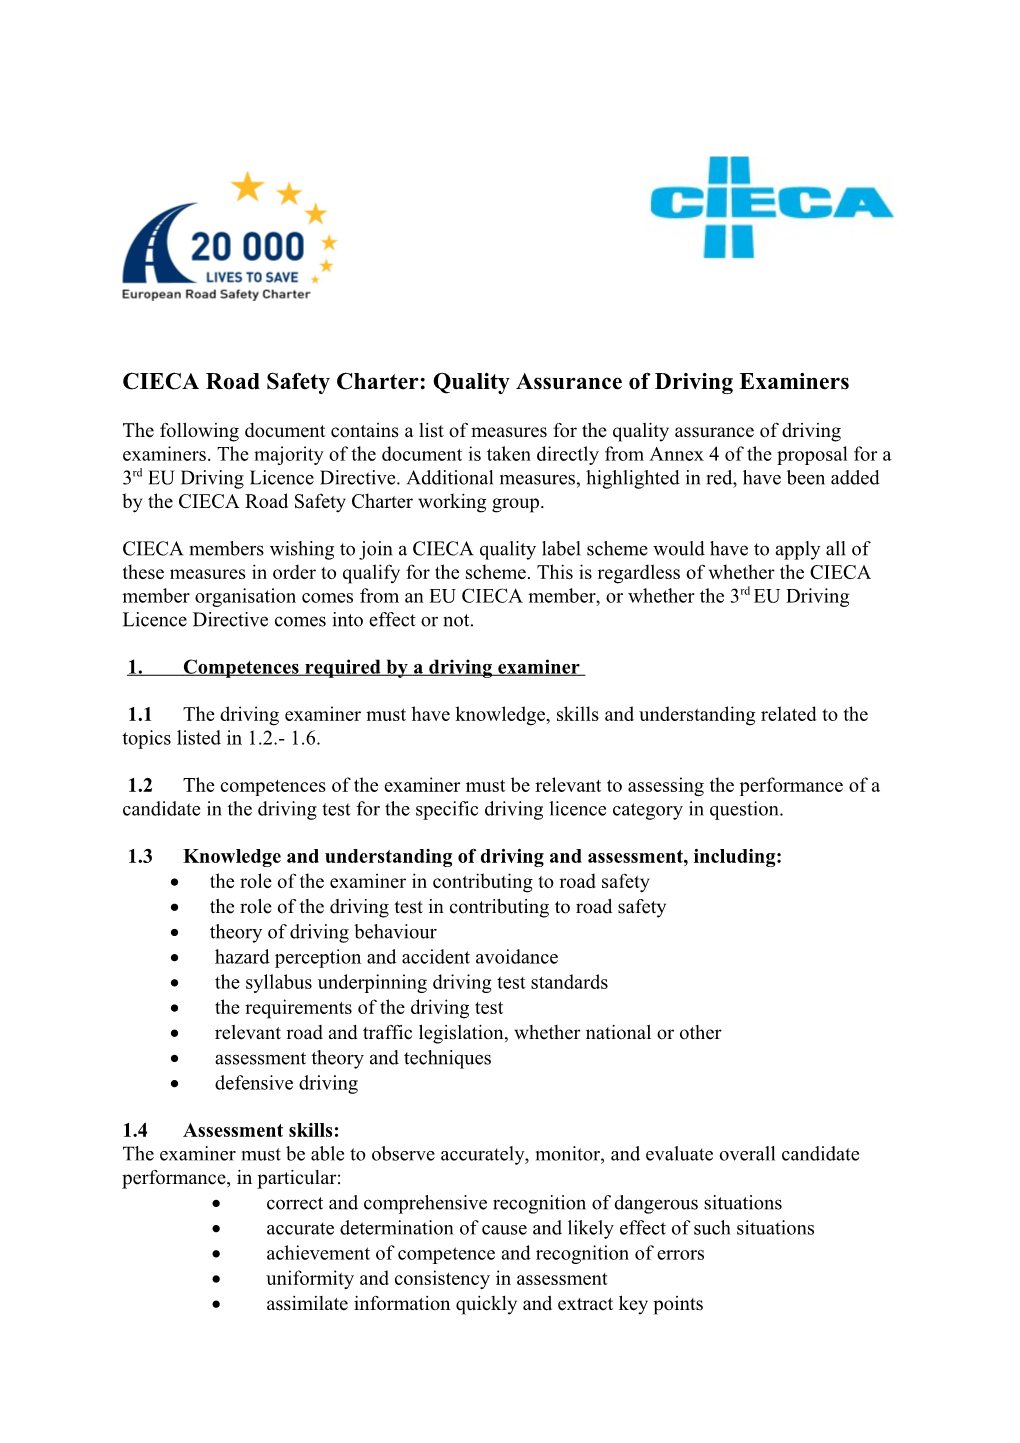 Minimum Standards for Driving Examiners